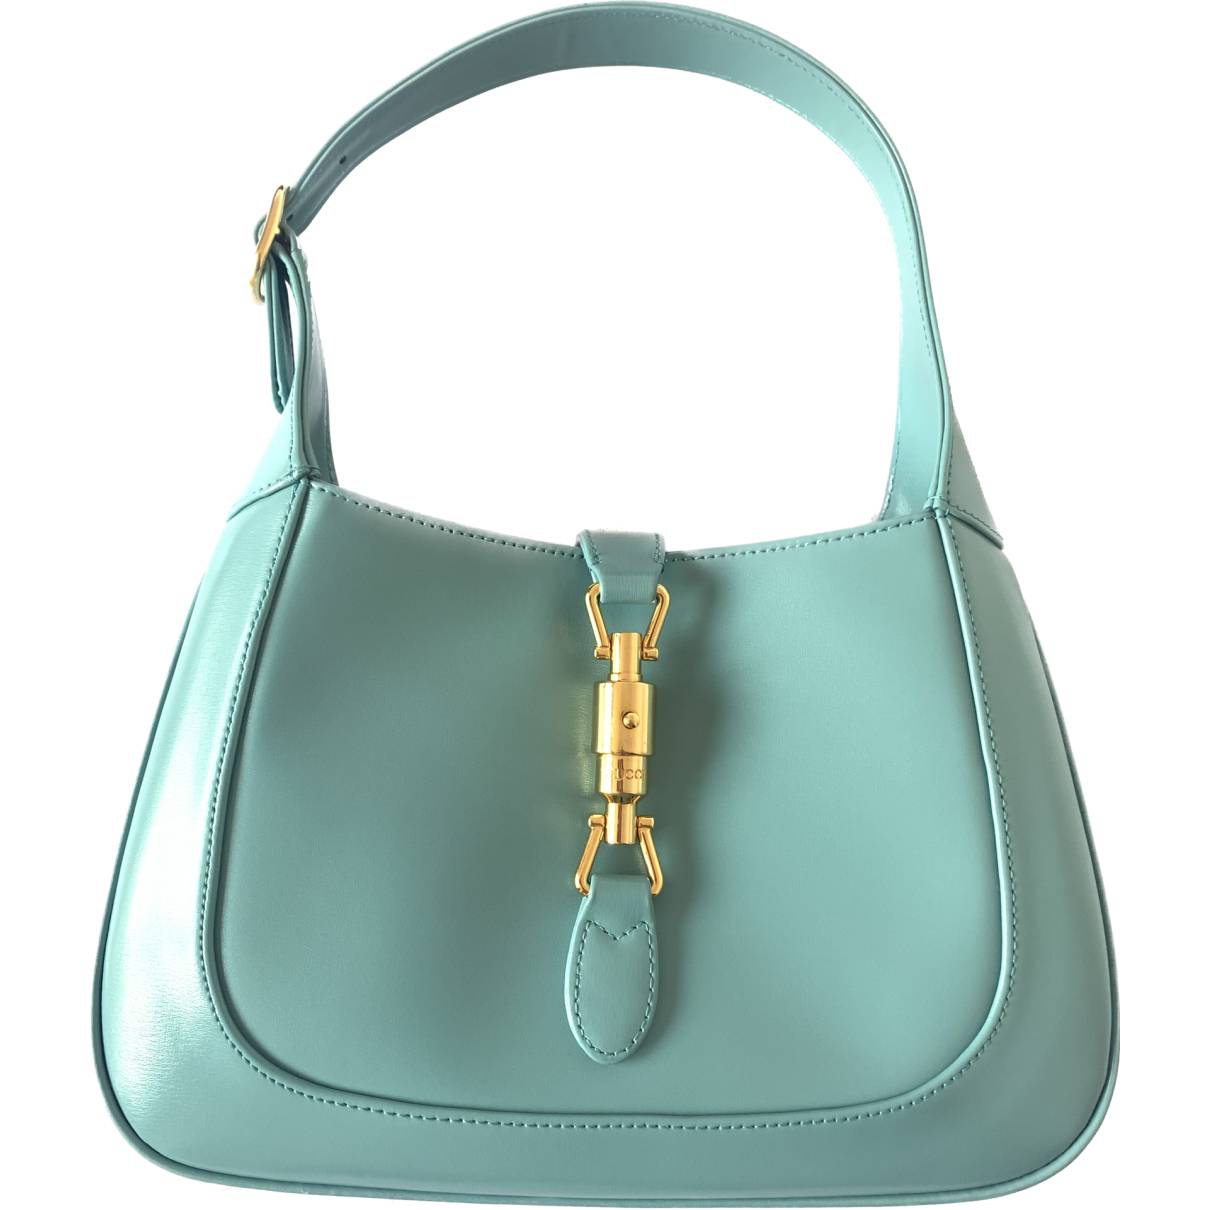 Jackie 1961 leather handbag Gucci Blue in Leather - 32027915